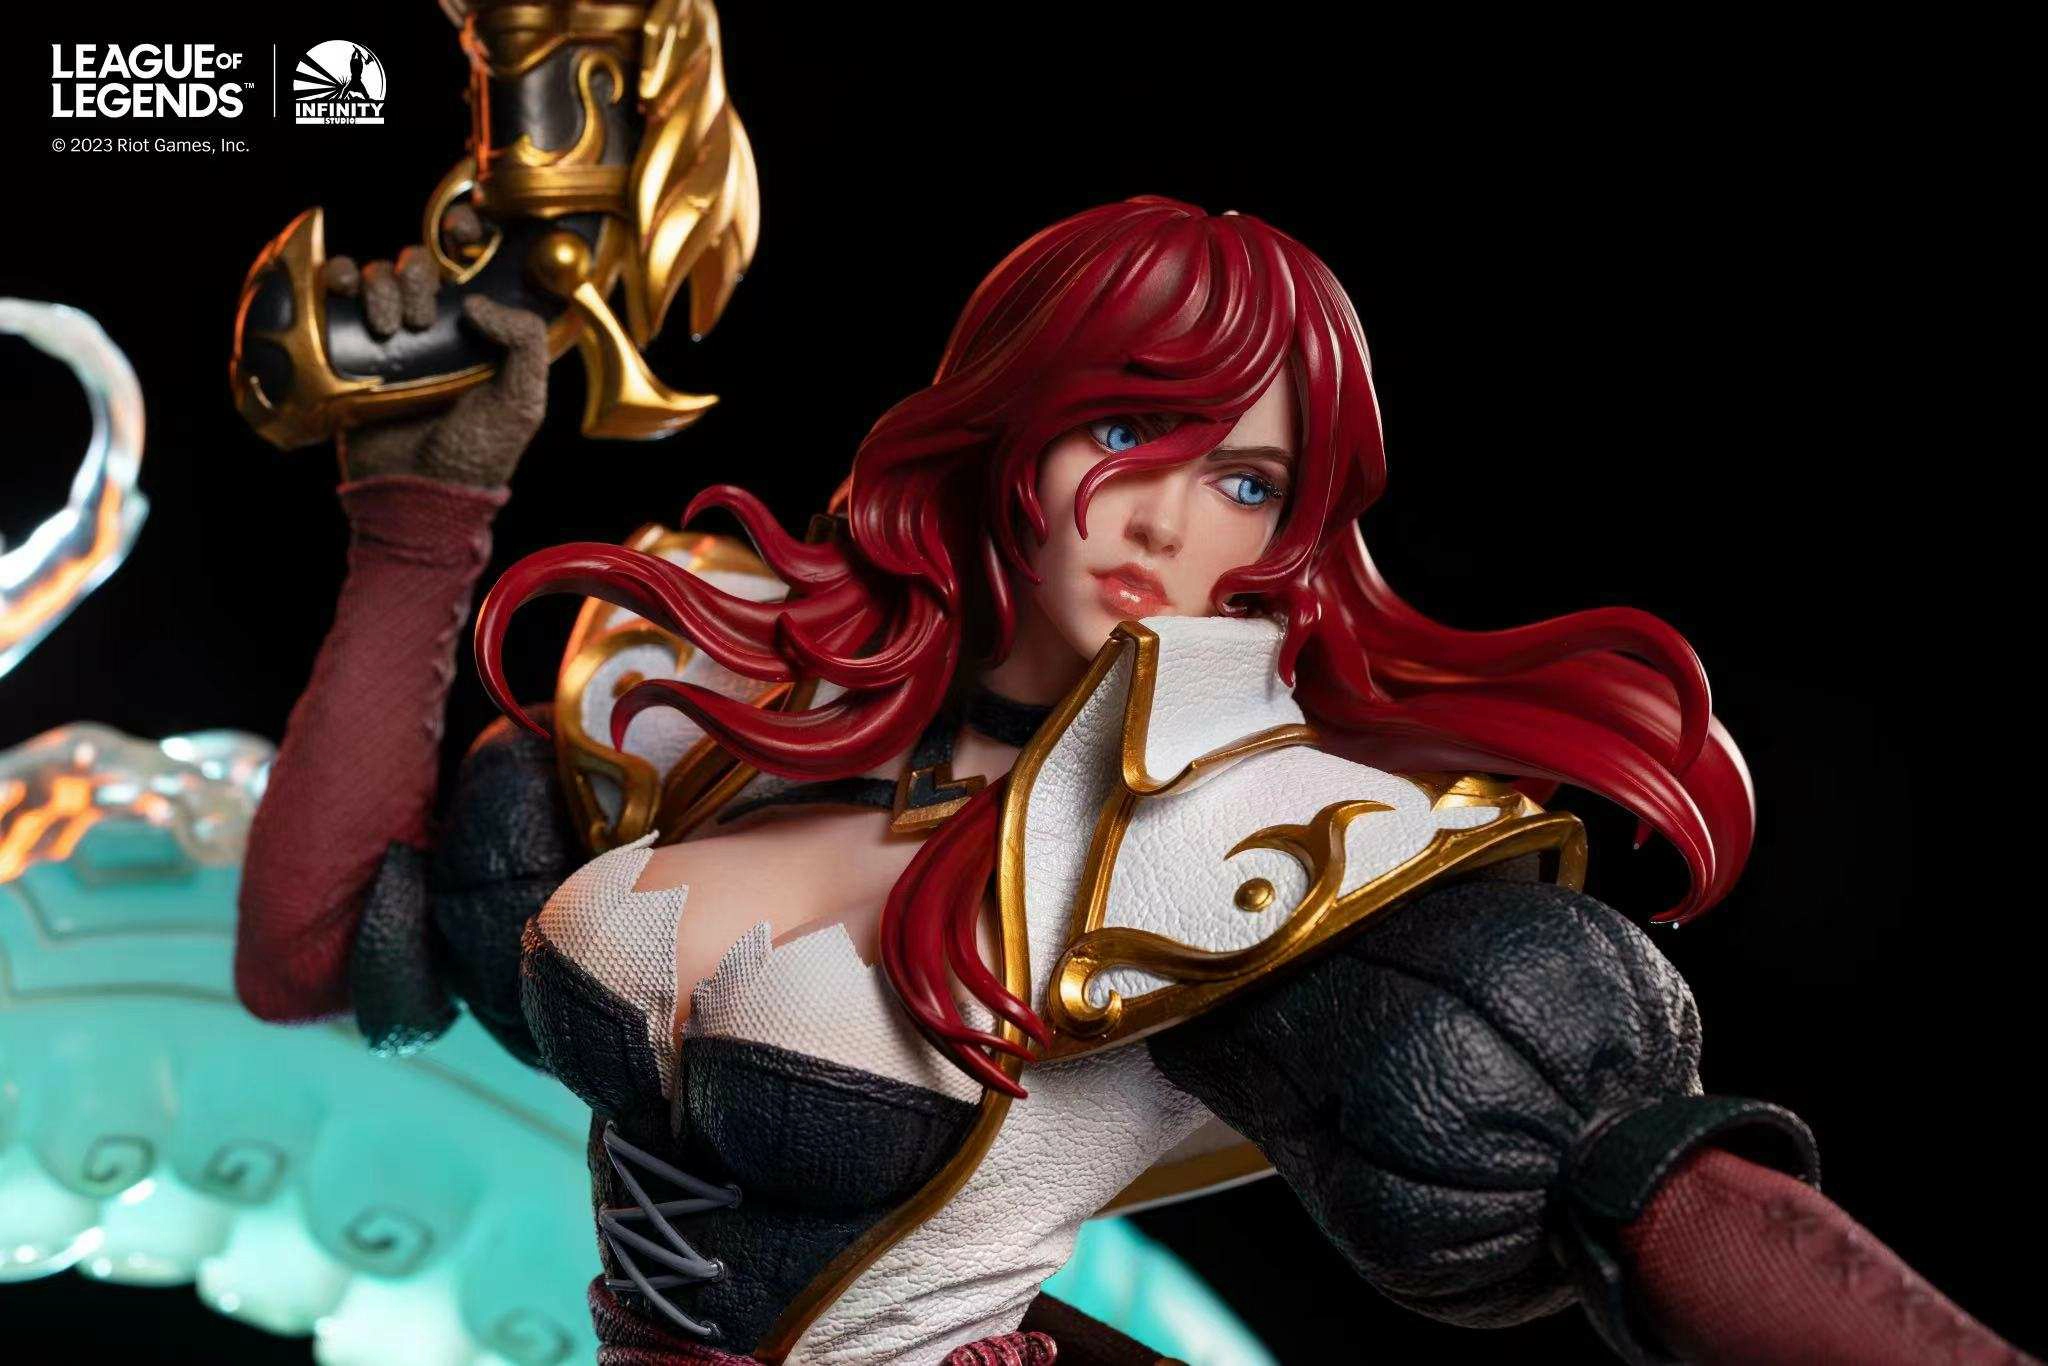 Miss Fortune - The Bounty Hunter Statue by Infinity Studio